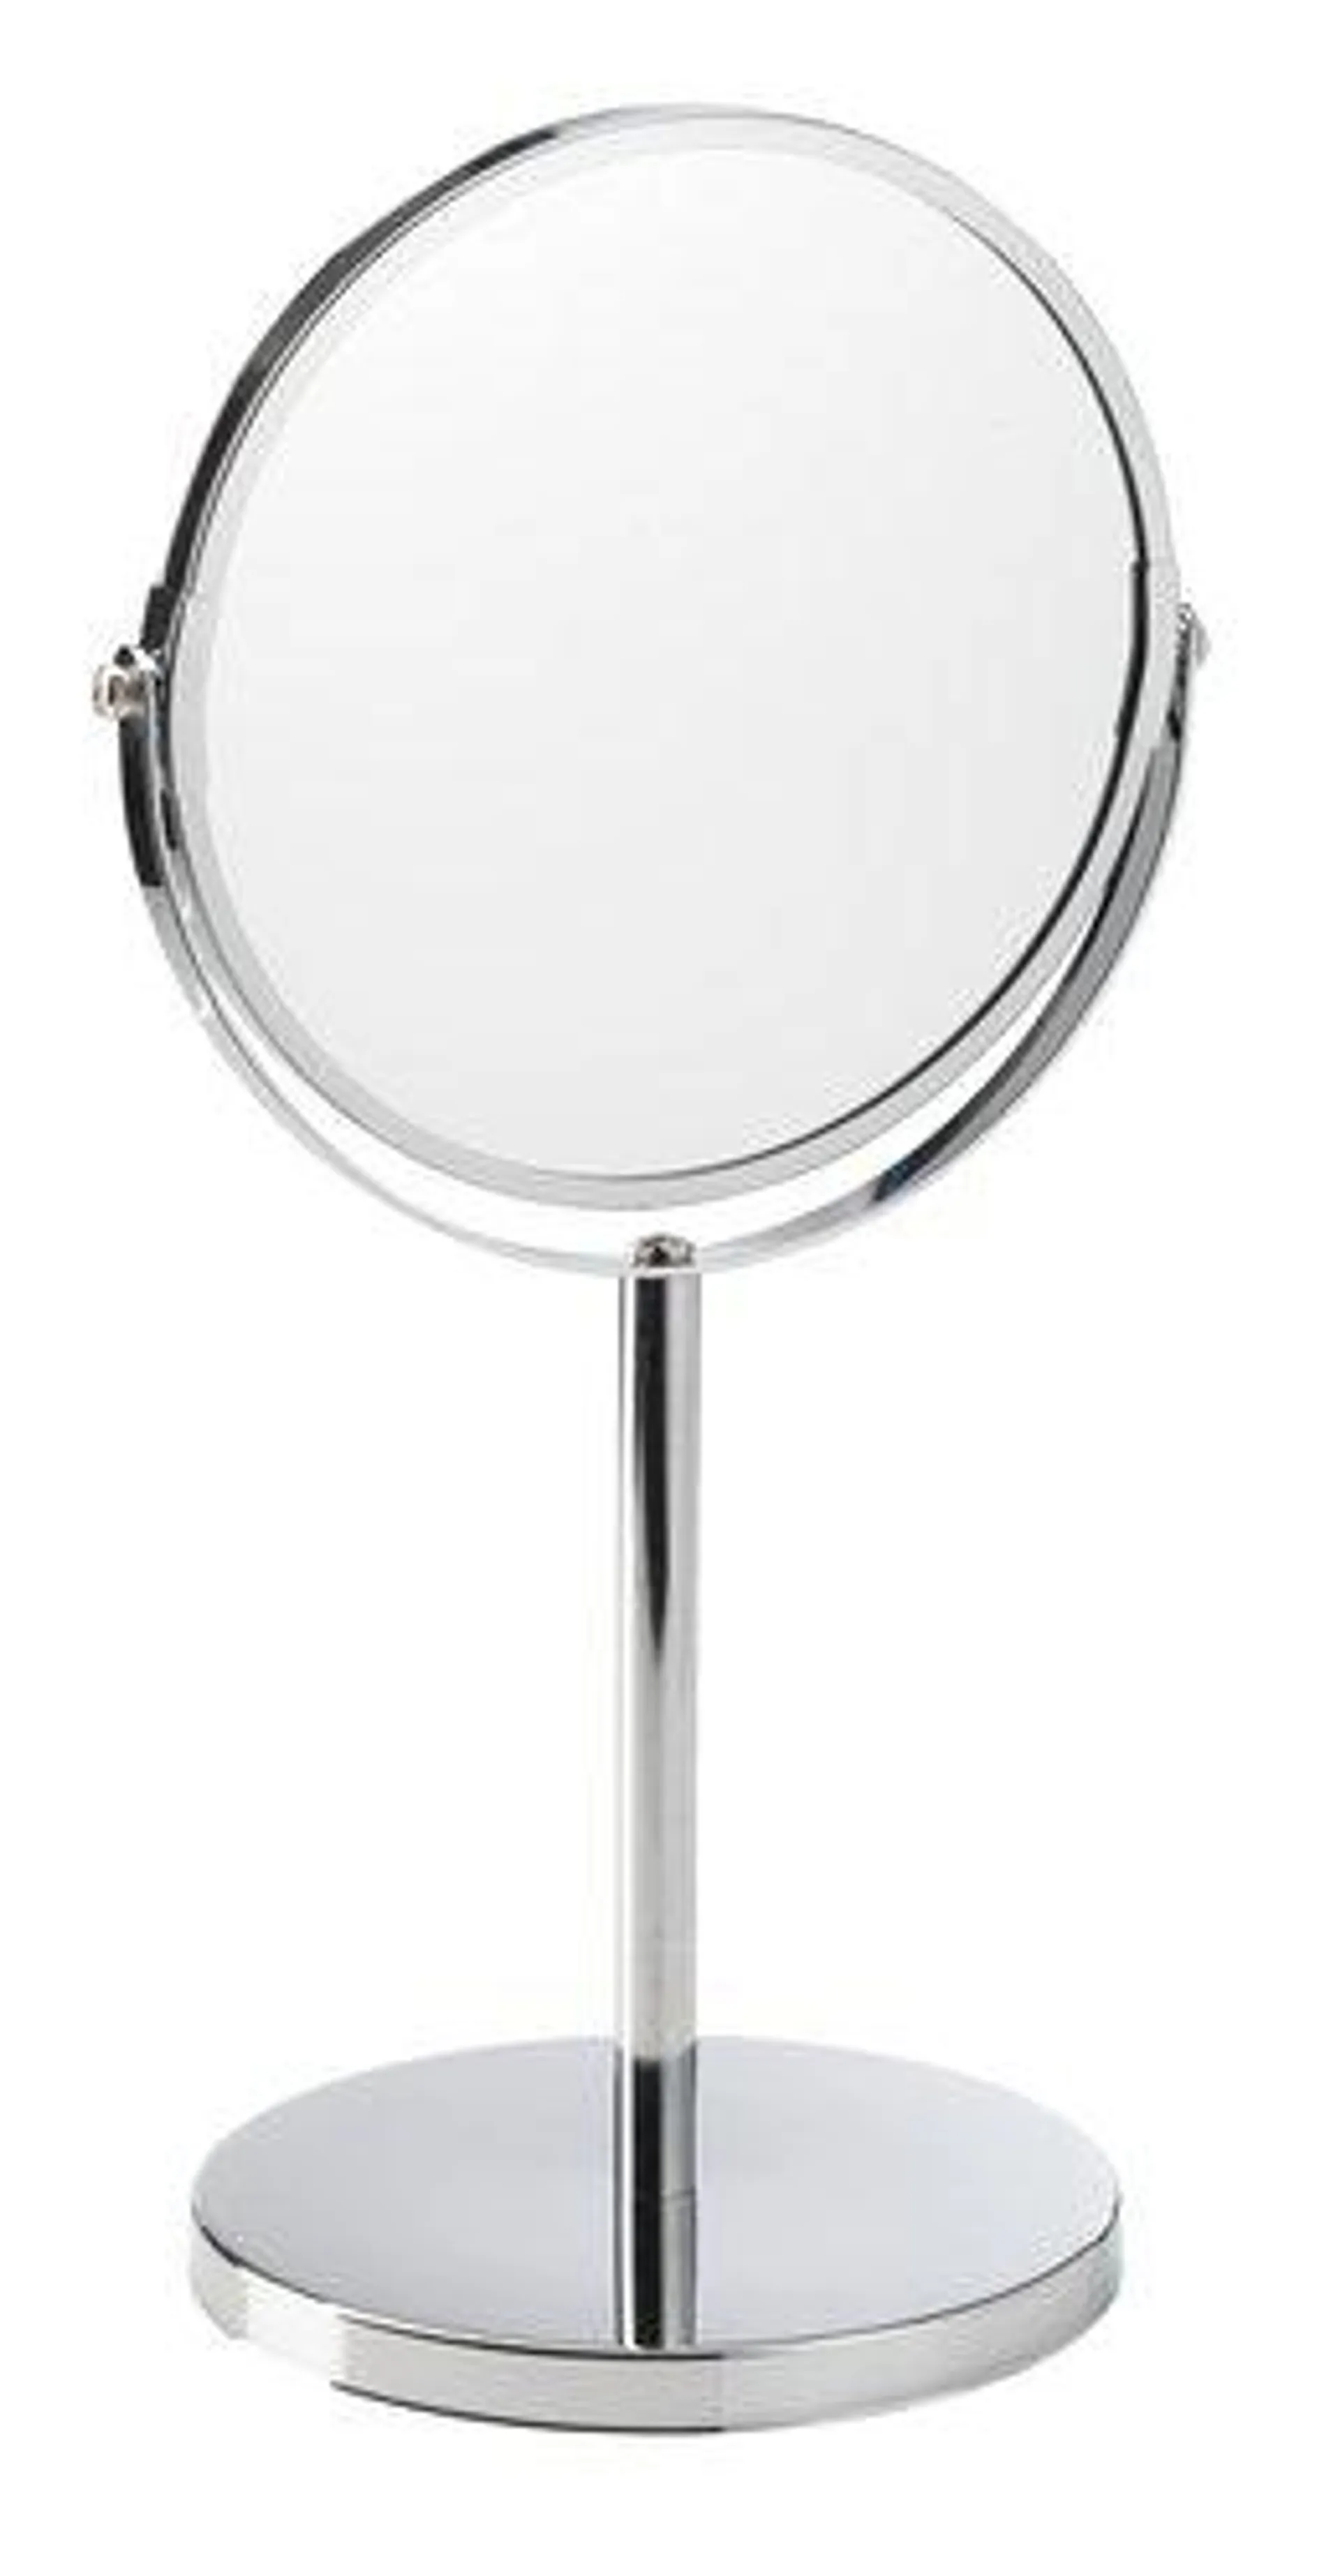 Double-sided mirror MEDLE H35cm steel